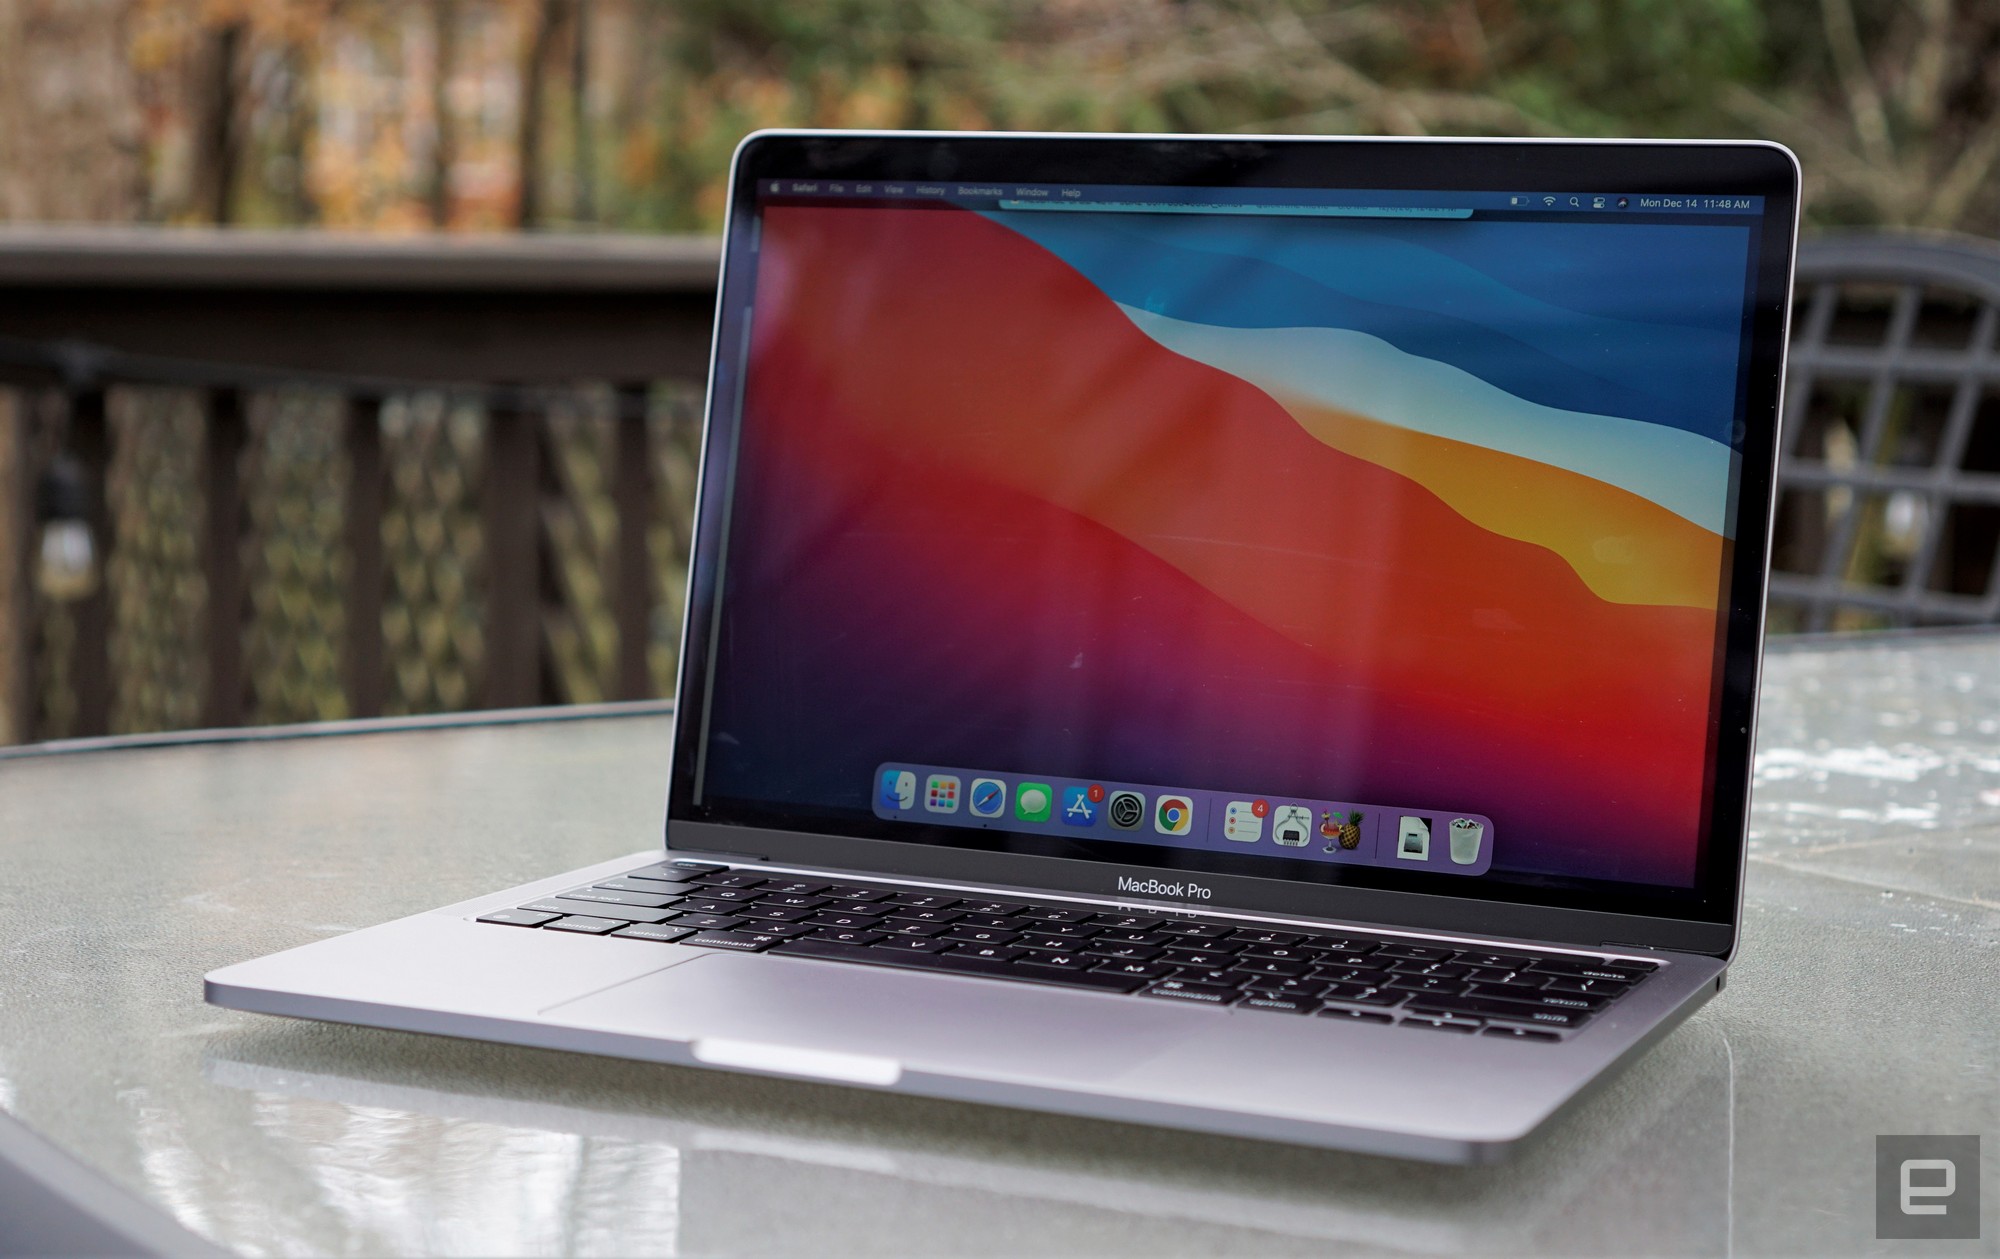 Brave's privacy-focused browser rolls out a version for Apple's M1 Macs